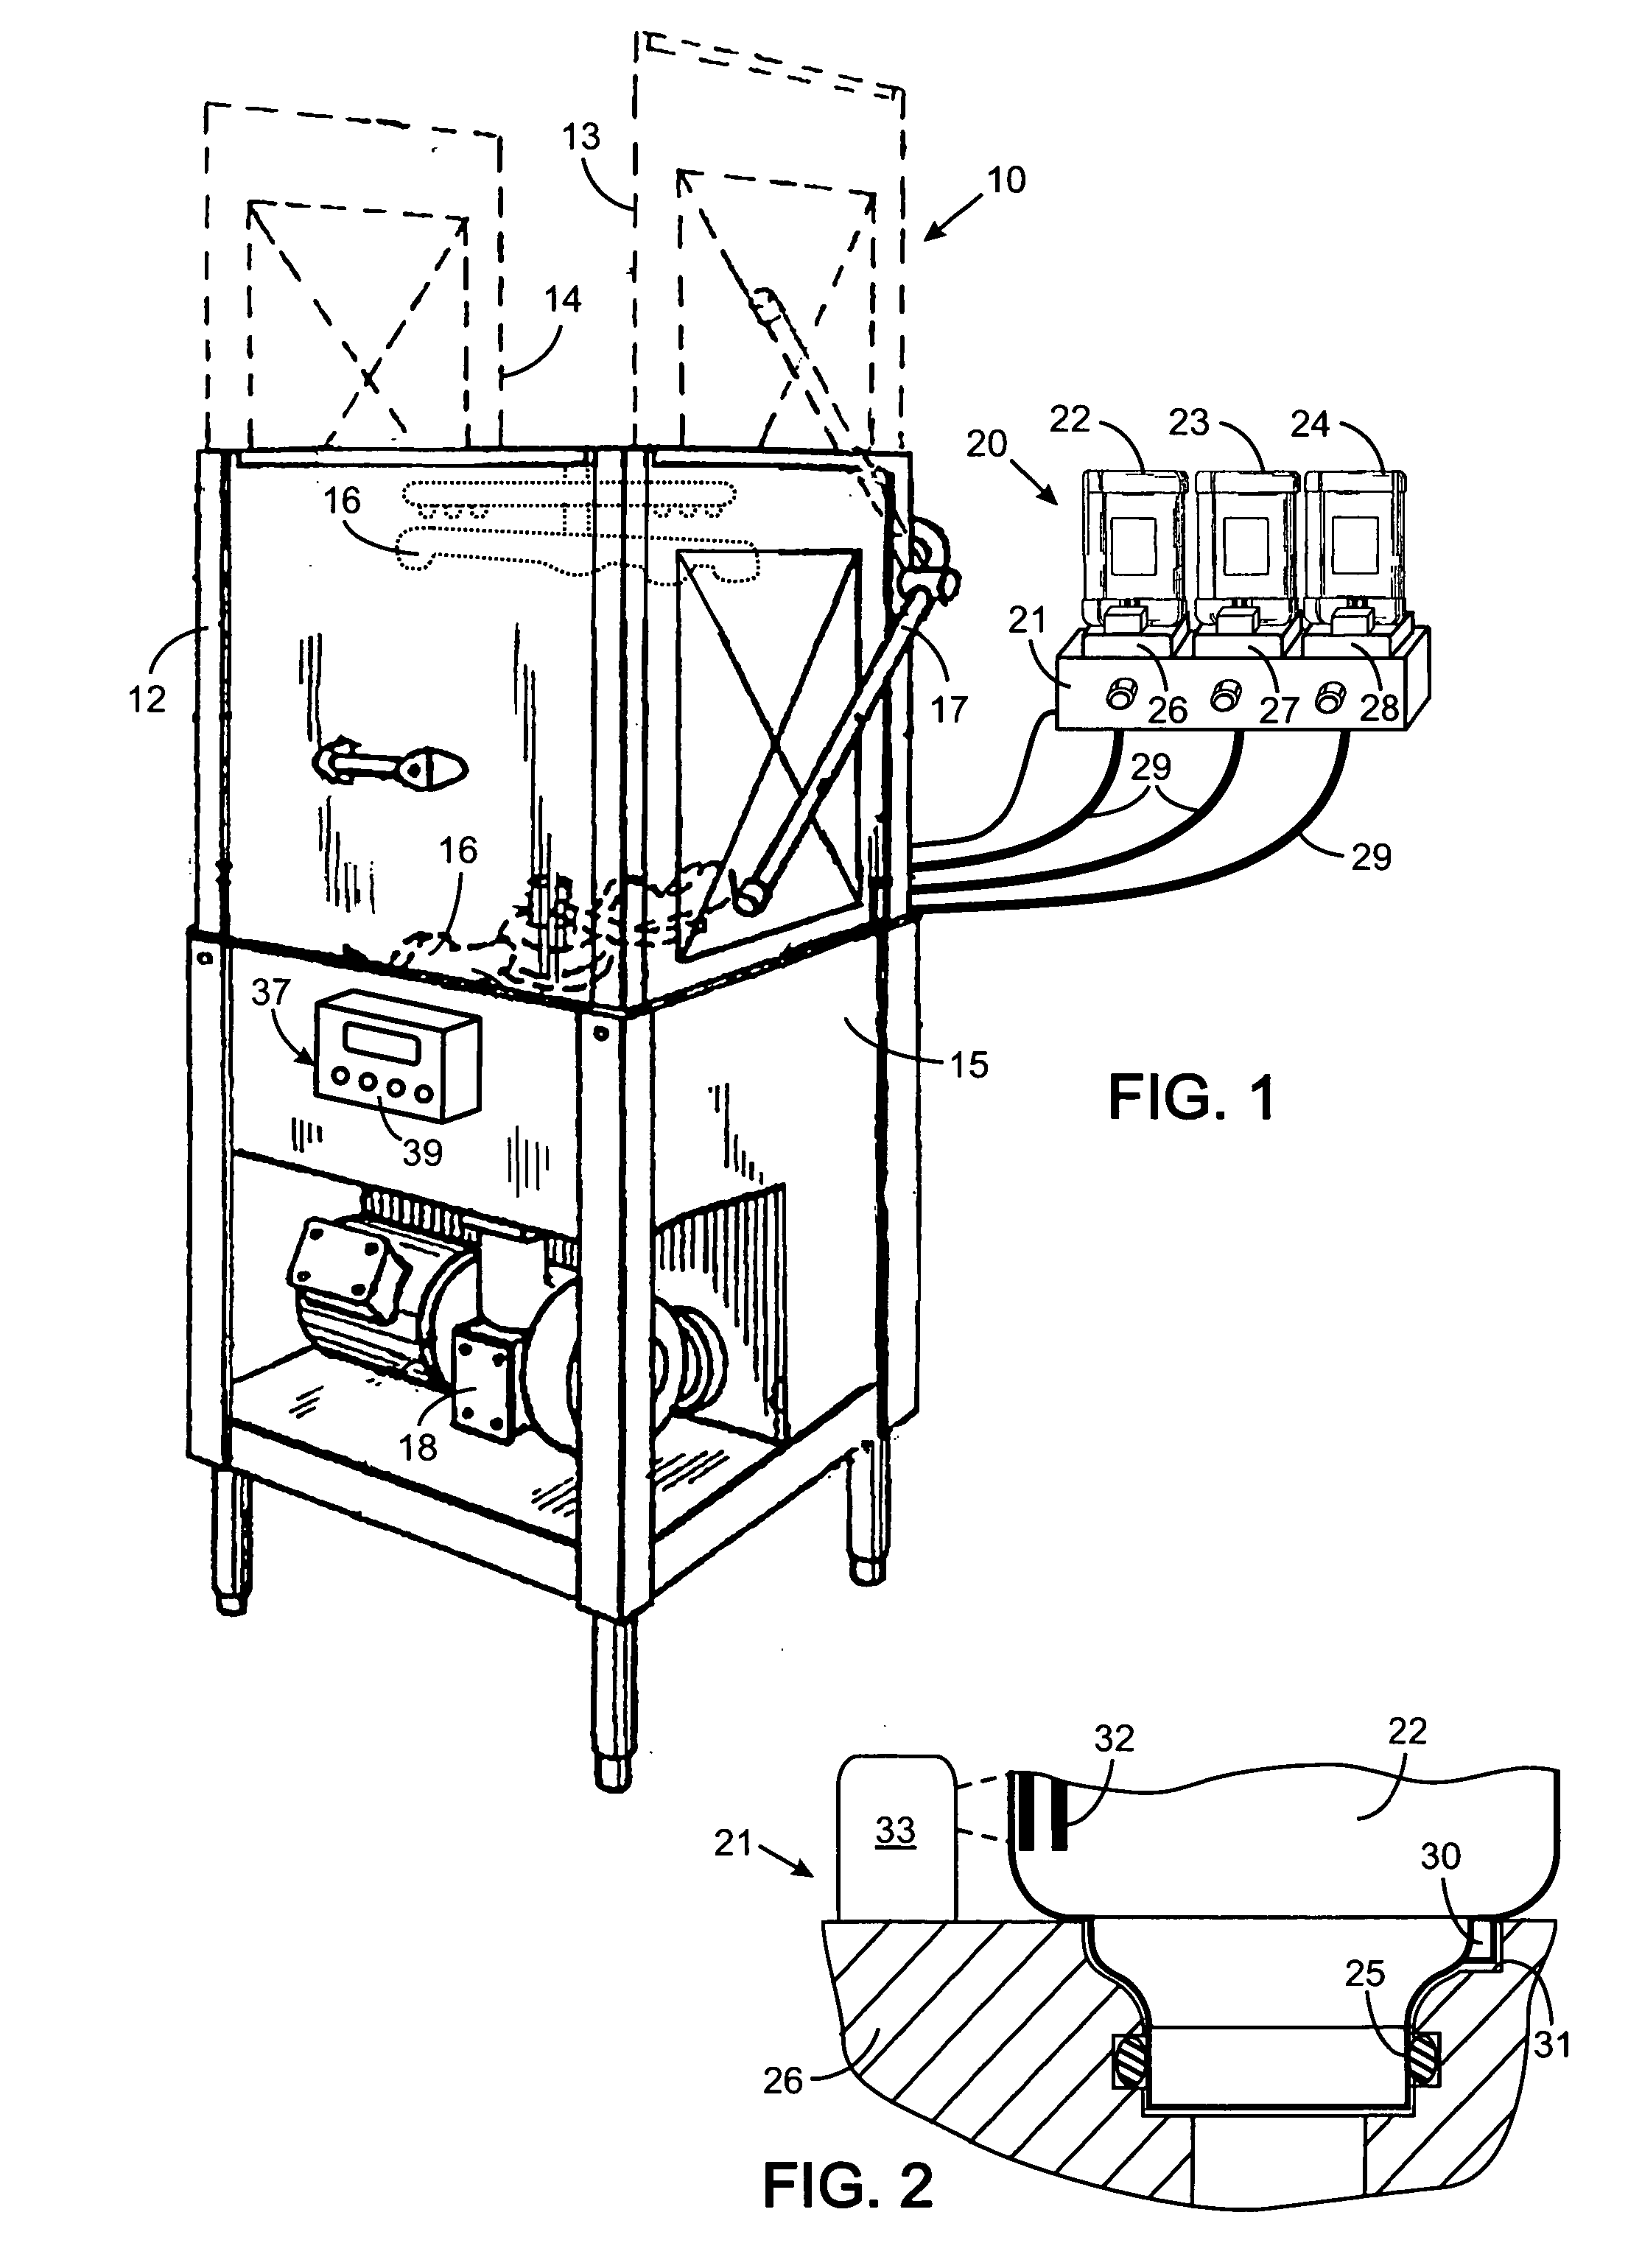 Automatically configurable chemical dosing apparatus for cleaning equipment